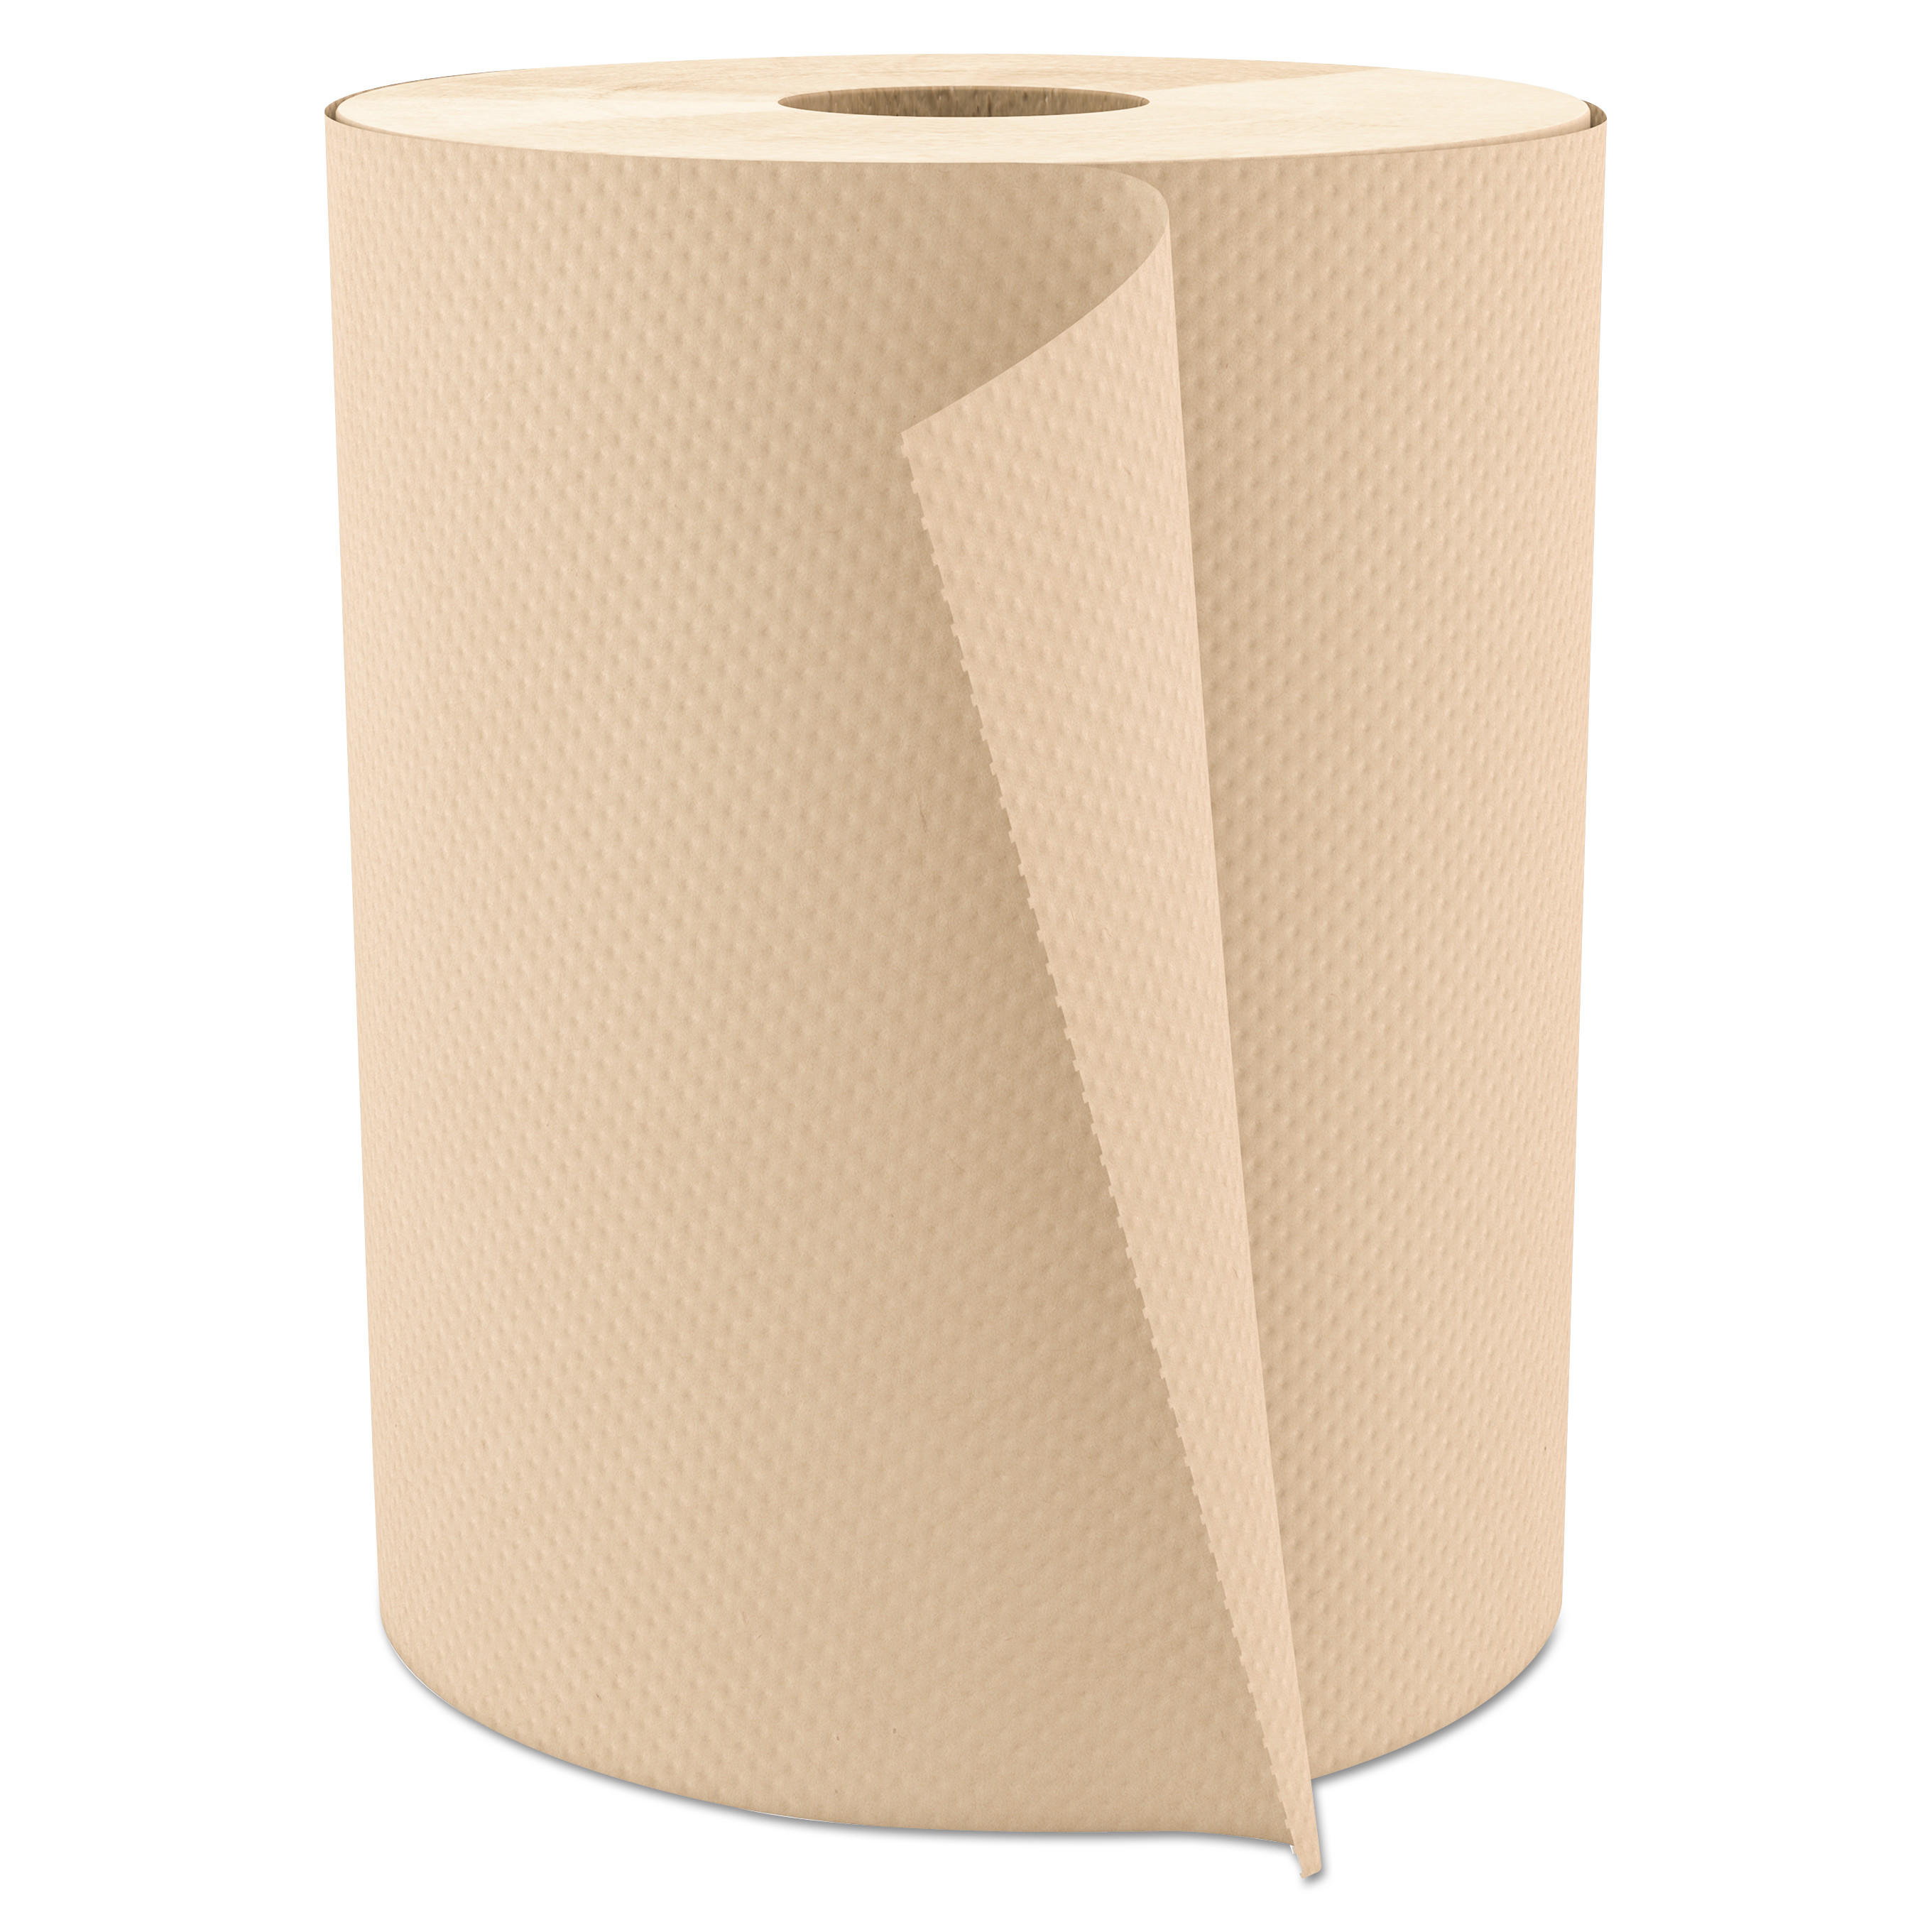  Cascades PRO H065 Select Roll Paper Towels, 1-Ply, 7.875 x 600 ft, Natural, 12/Carton (CSDH065) 